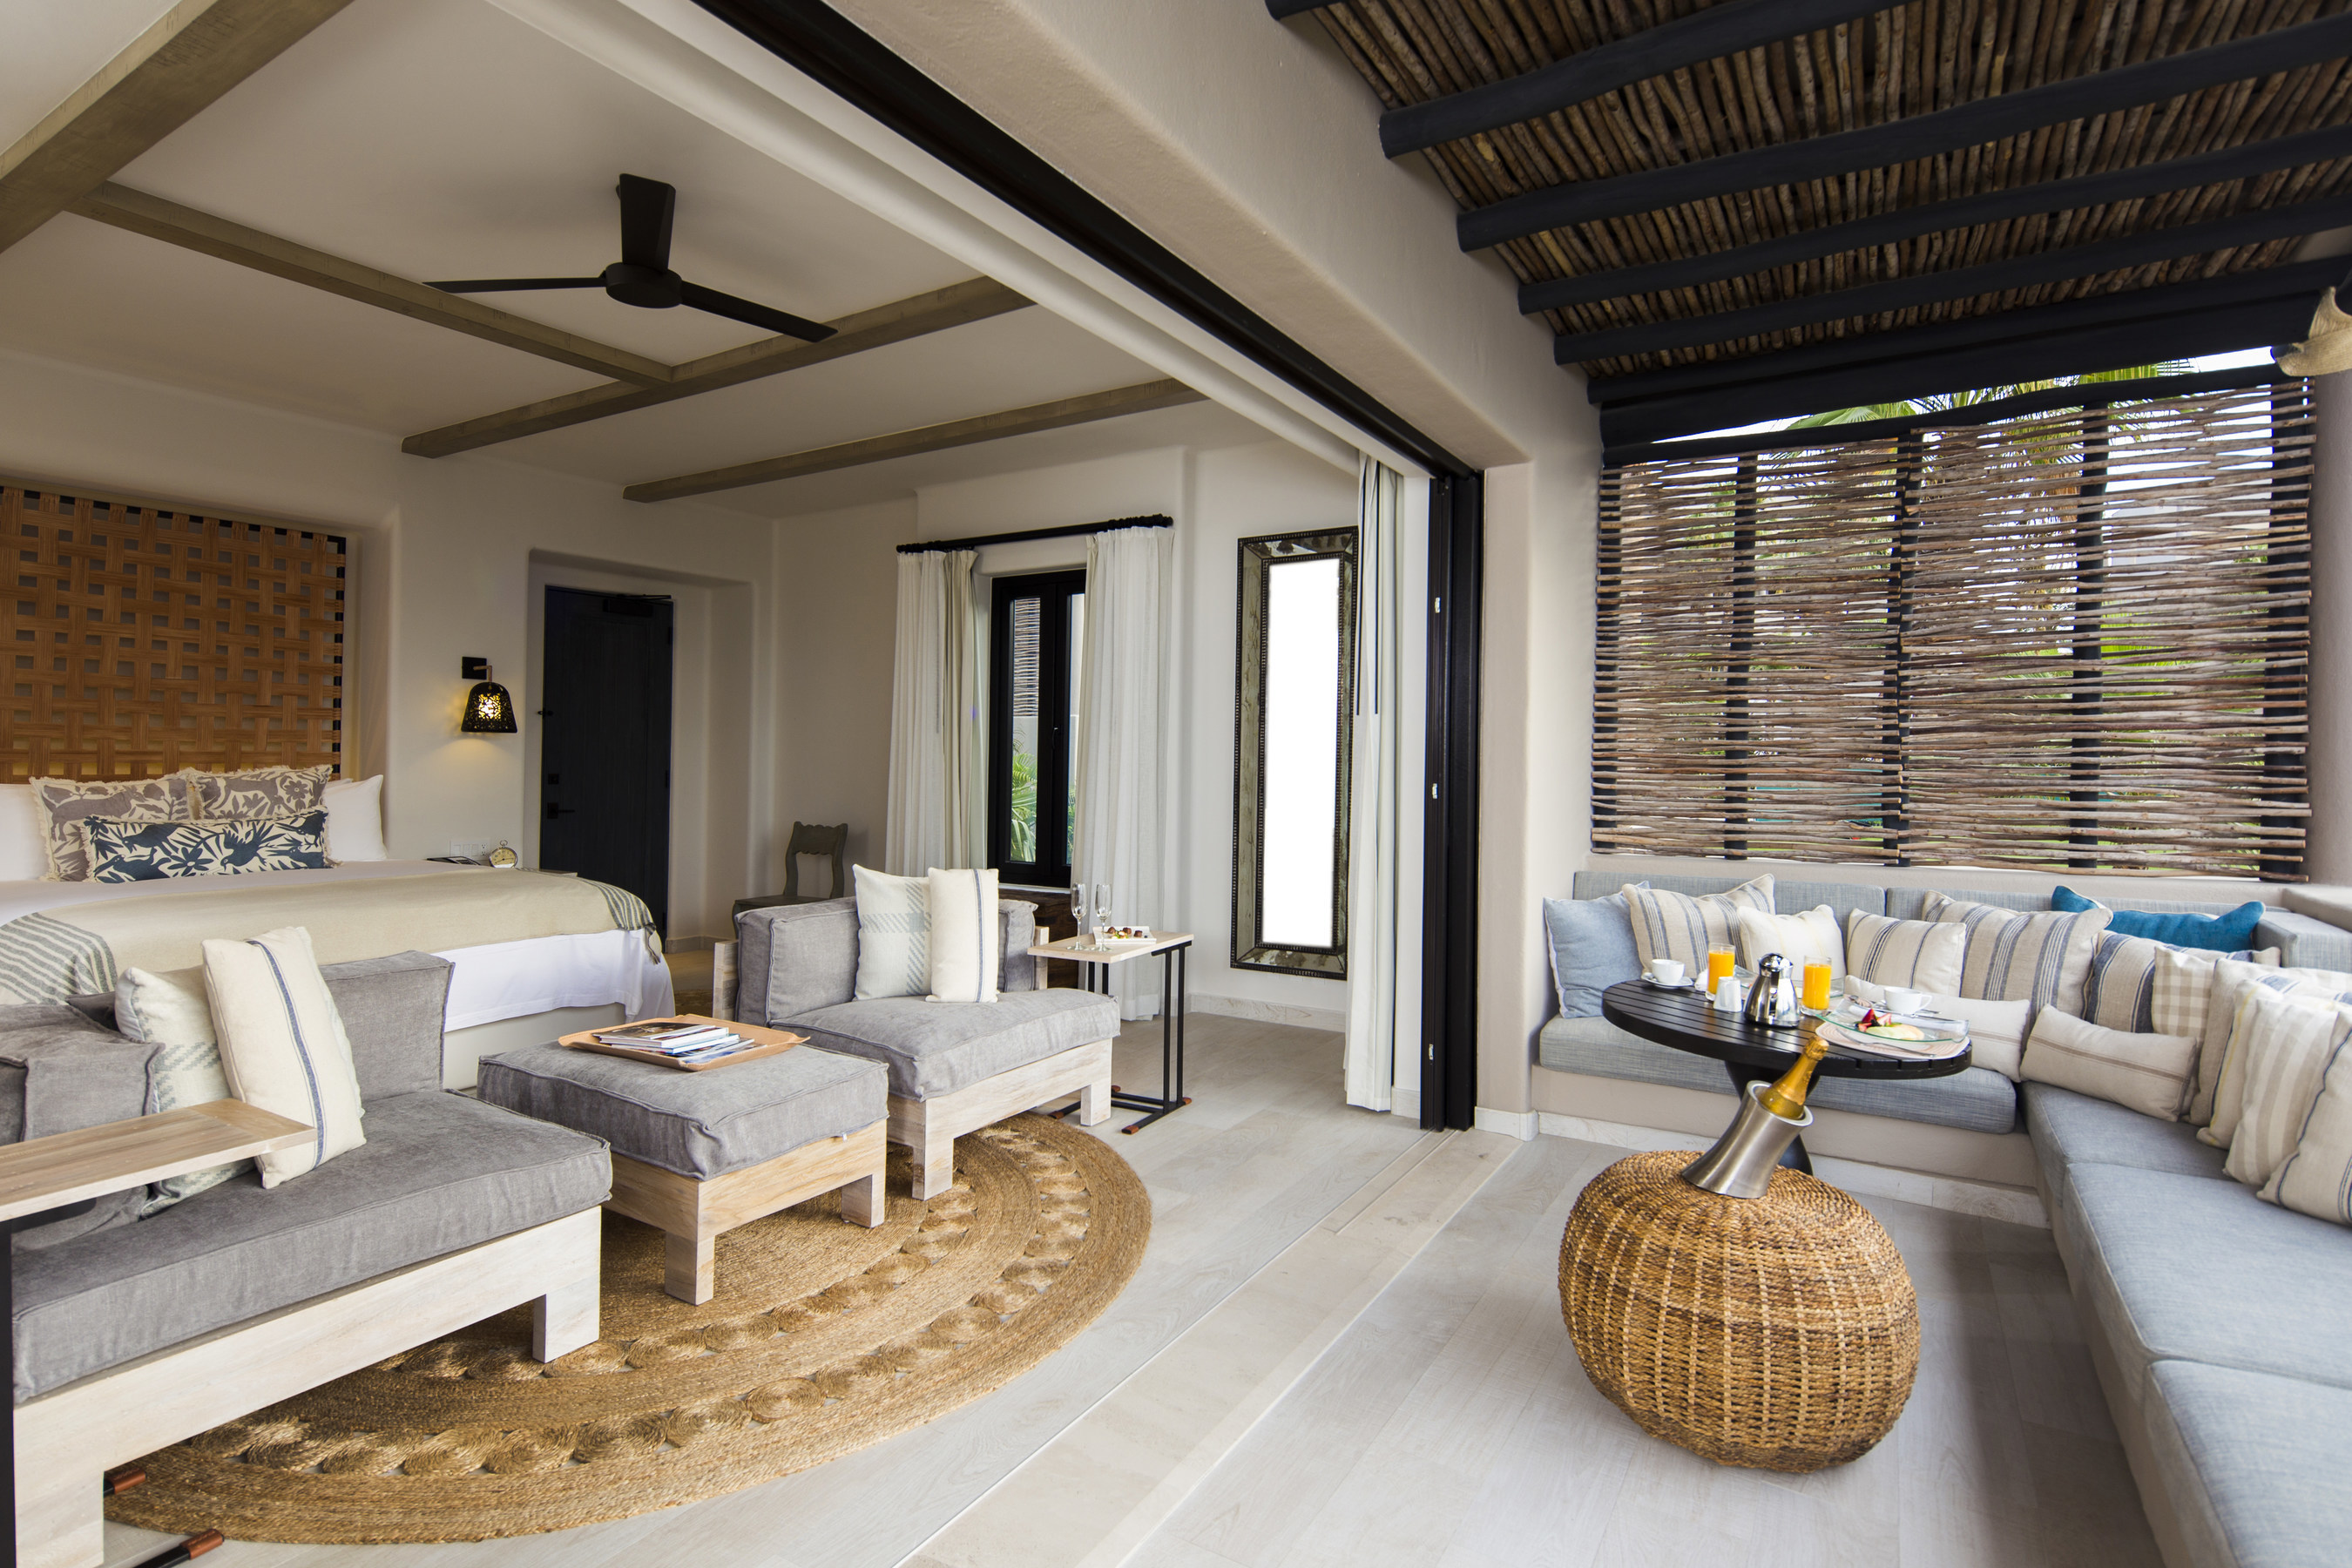 Esperanza, An Auberge Resort, reopens in June 2015 with a comprehensive revitalization that will usher in a new era of luxury and sophistication for the romantic oceanfront property.